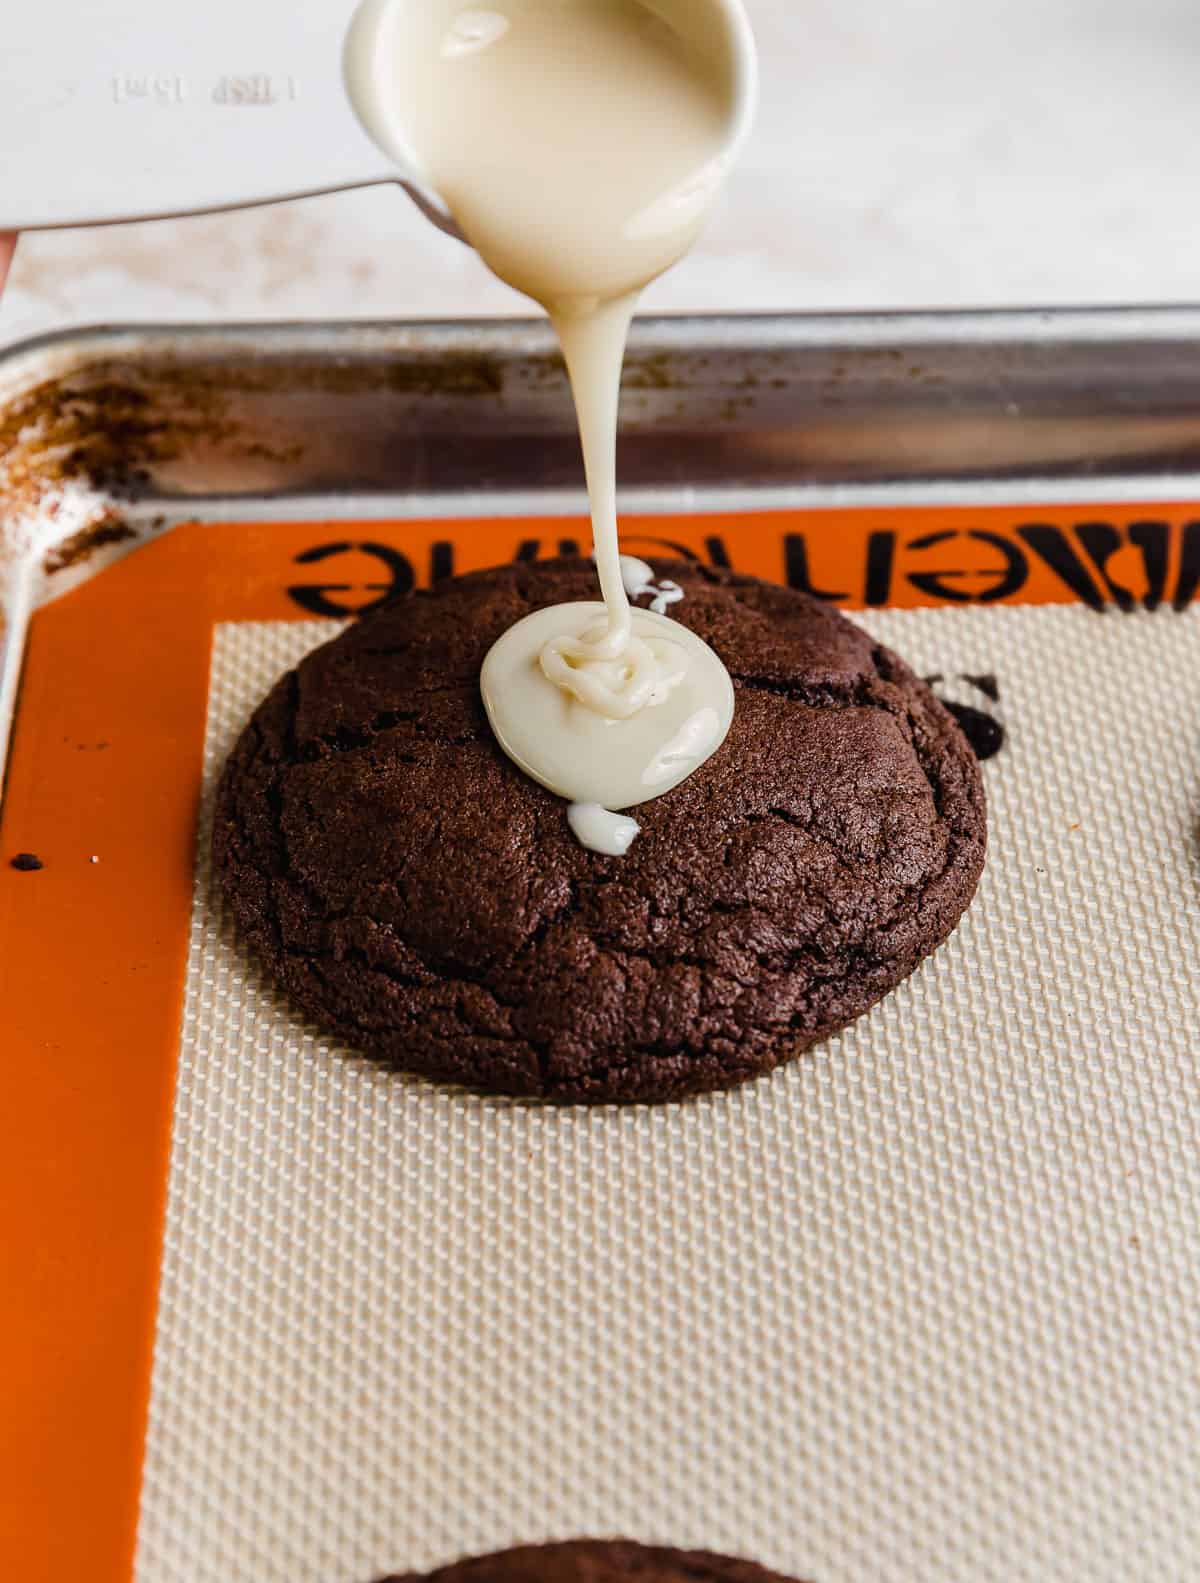 Sweetened condensed milk being poured overtop a chocolate cookie.